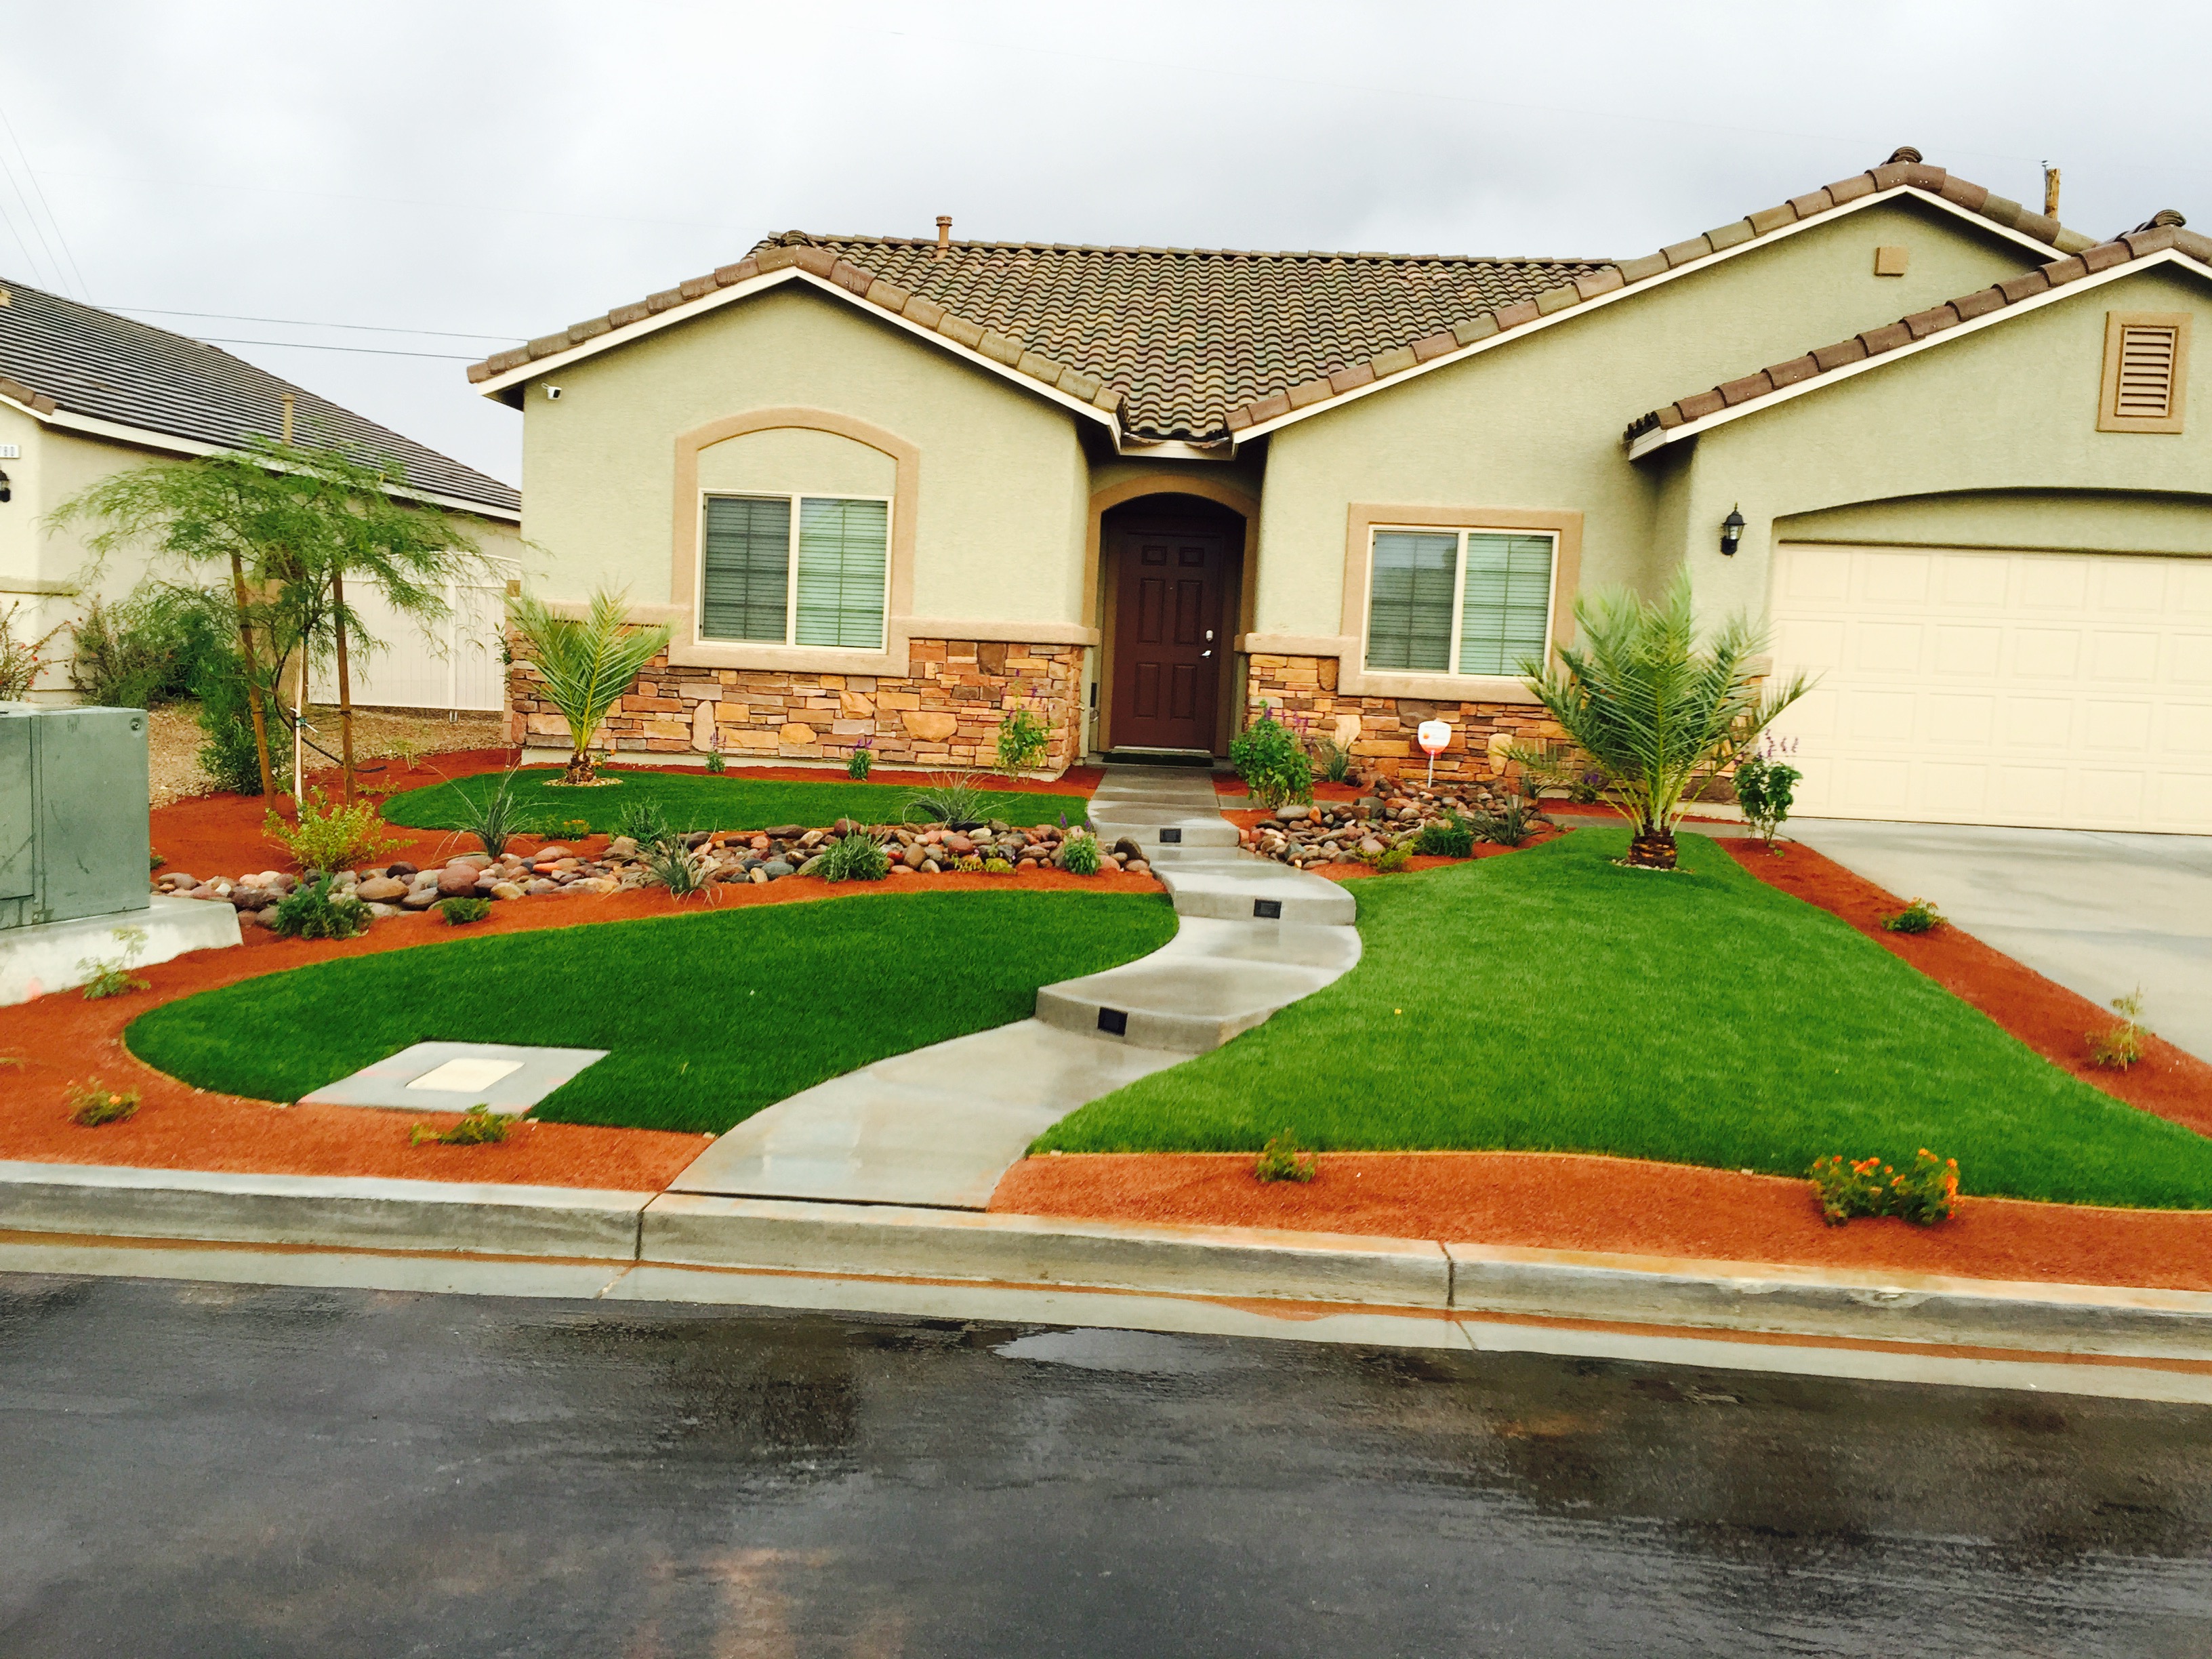 Gorgeous front yard in a suburban neighborhood, including neat grass, natural stones, and local plant life.